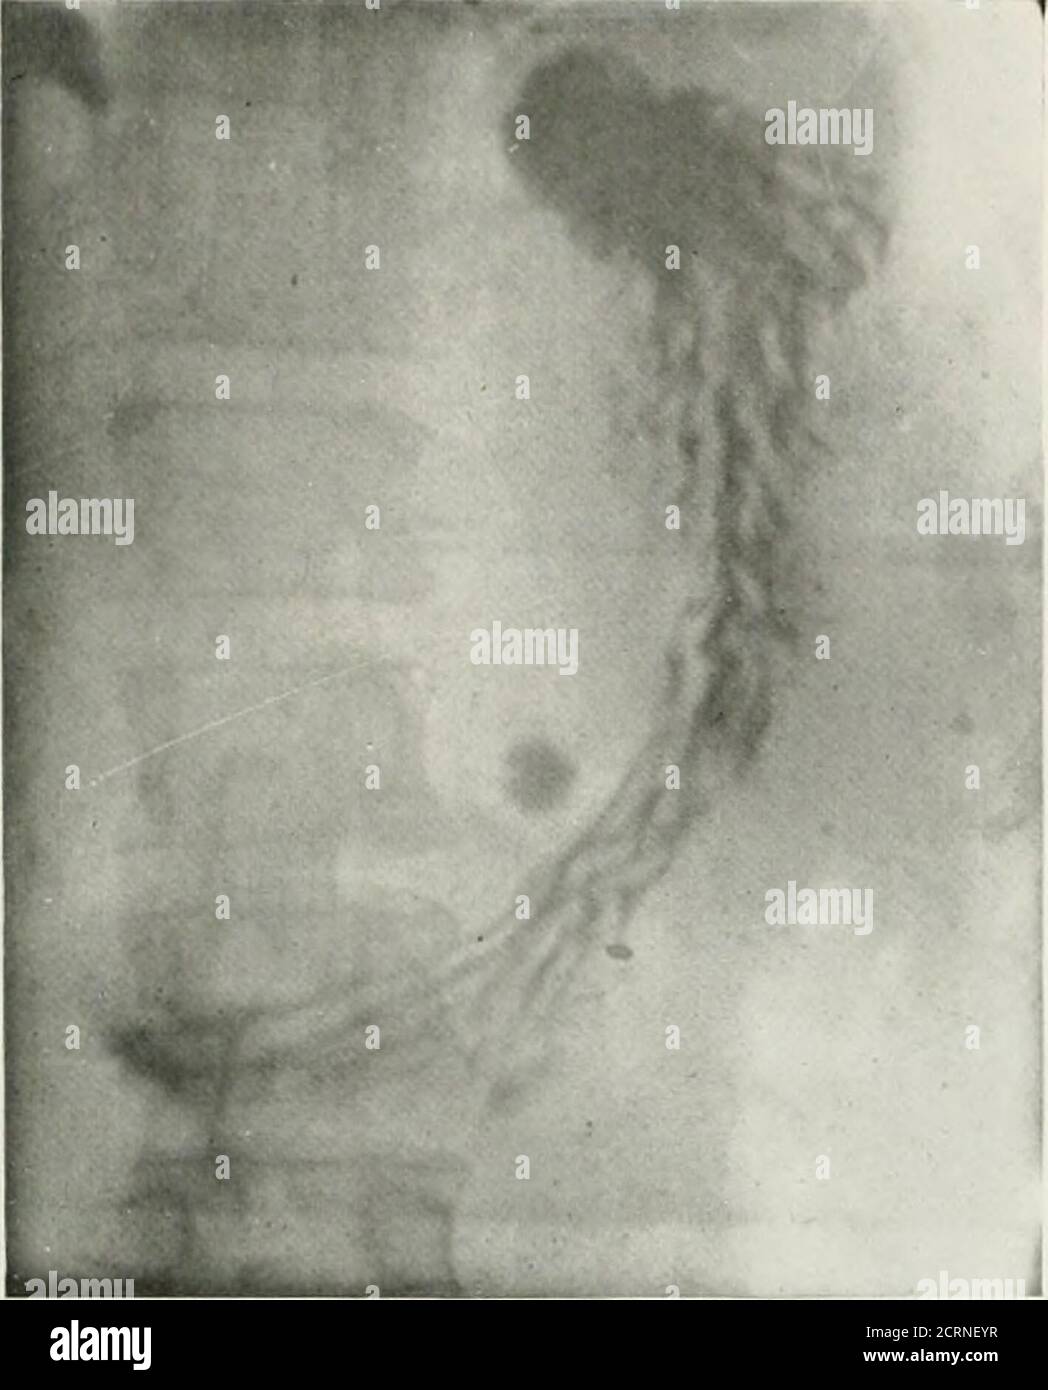 . The American journal of roentgenology, radium therapy and nuclear medicine . e wide arlati()n in the size and character of these folds, particularly during fluoros-copy. Later, It seemed that such study ofthe mucosa offered possibilities In demon-strating the earlier changes of the organiclesion and In the more detailed studyof those conditions already recognizedby the present day routine procedures.In this work the condition of the gastricmucosa has been studied chiefly throughconsideration of the rugae. Usually, thesefolds of mucous membrane arise in thecardia and extend downward towardst Stock Photo